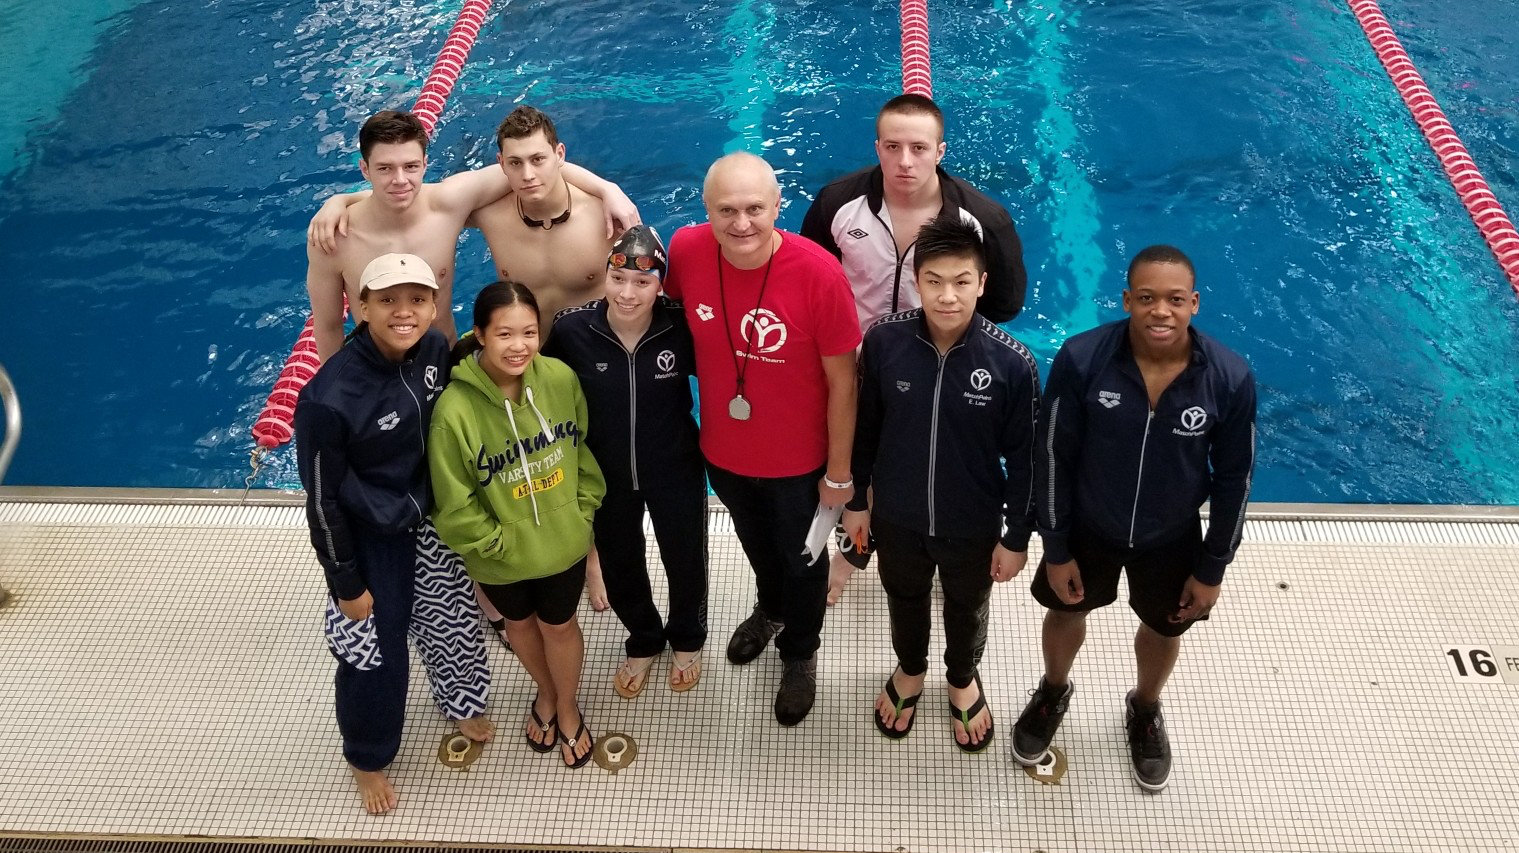 MatchPoint NYC Swimmers Achieve 12 New Records at Hydro Meet